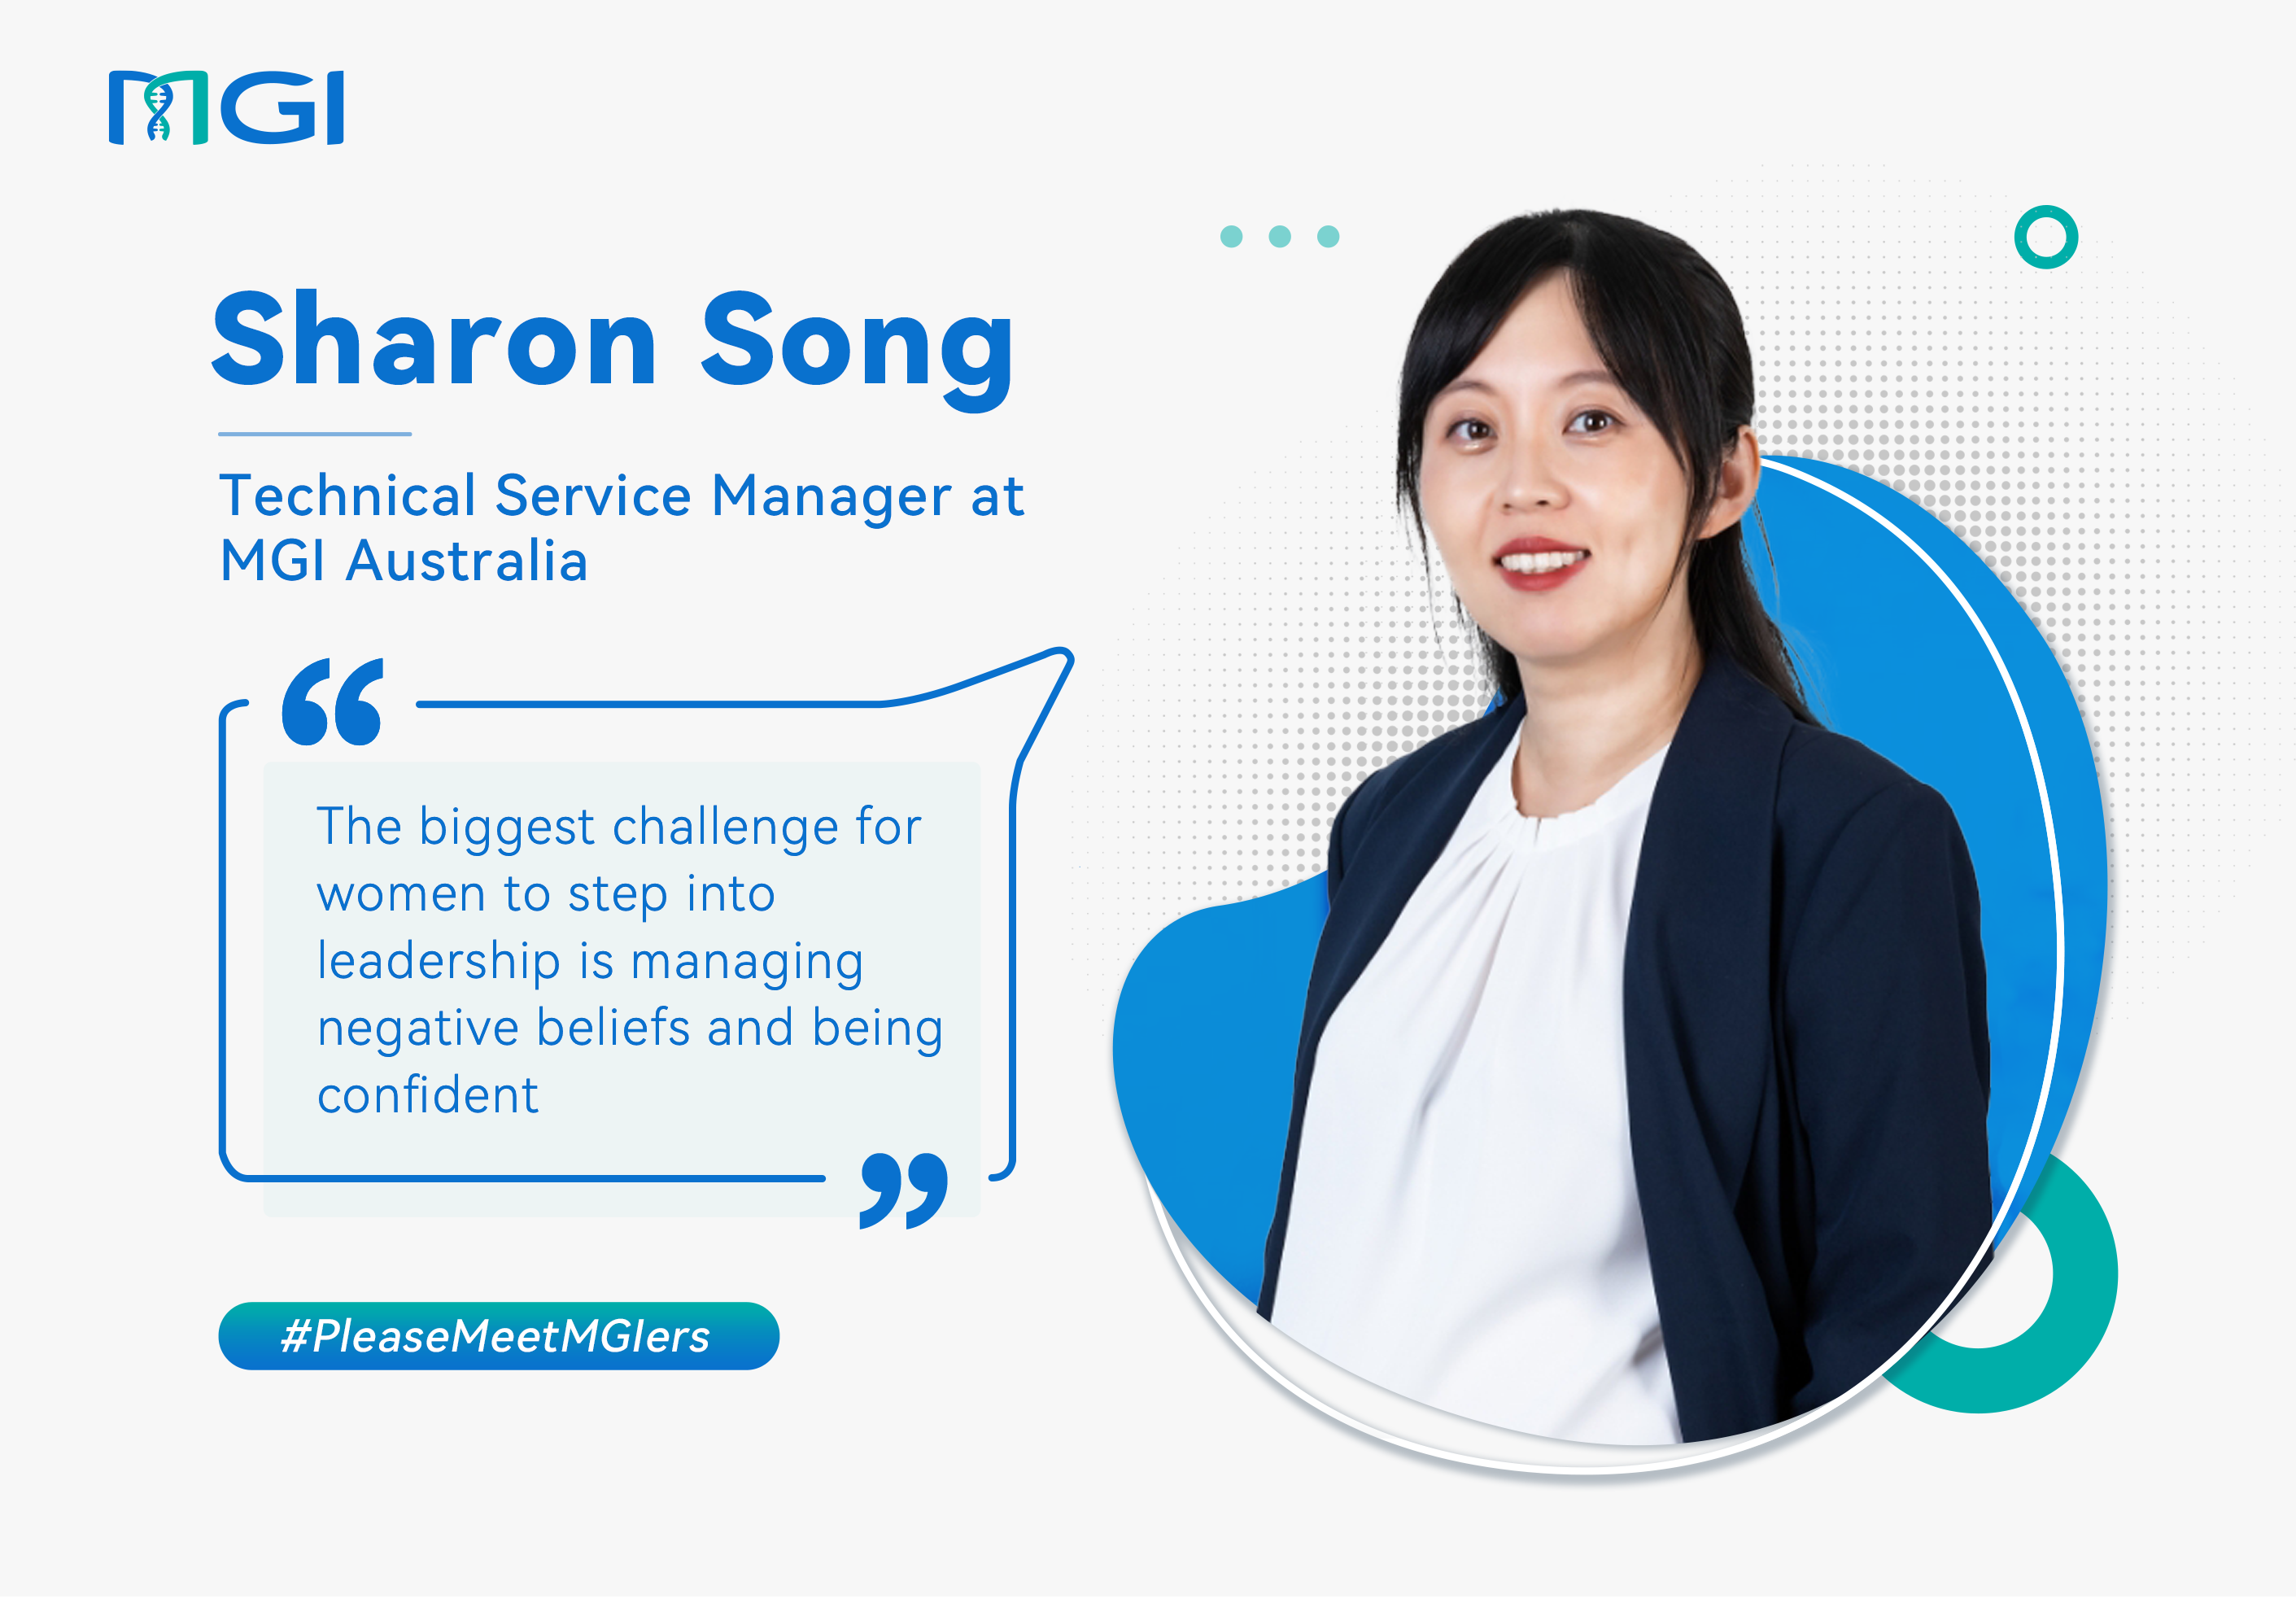 Interview with Sharon Song: The Biggest Challenge for Women to Step into Leadership Is Managing Negative Beliefs And Being Confident